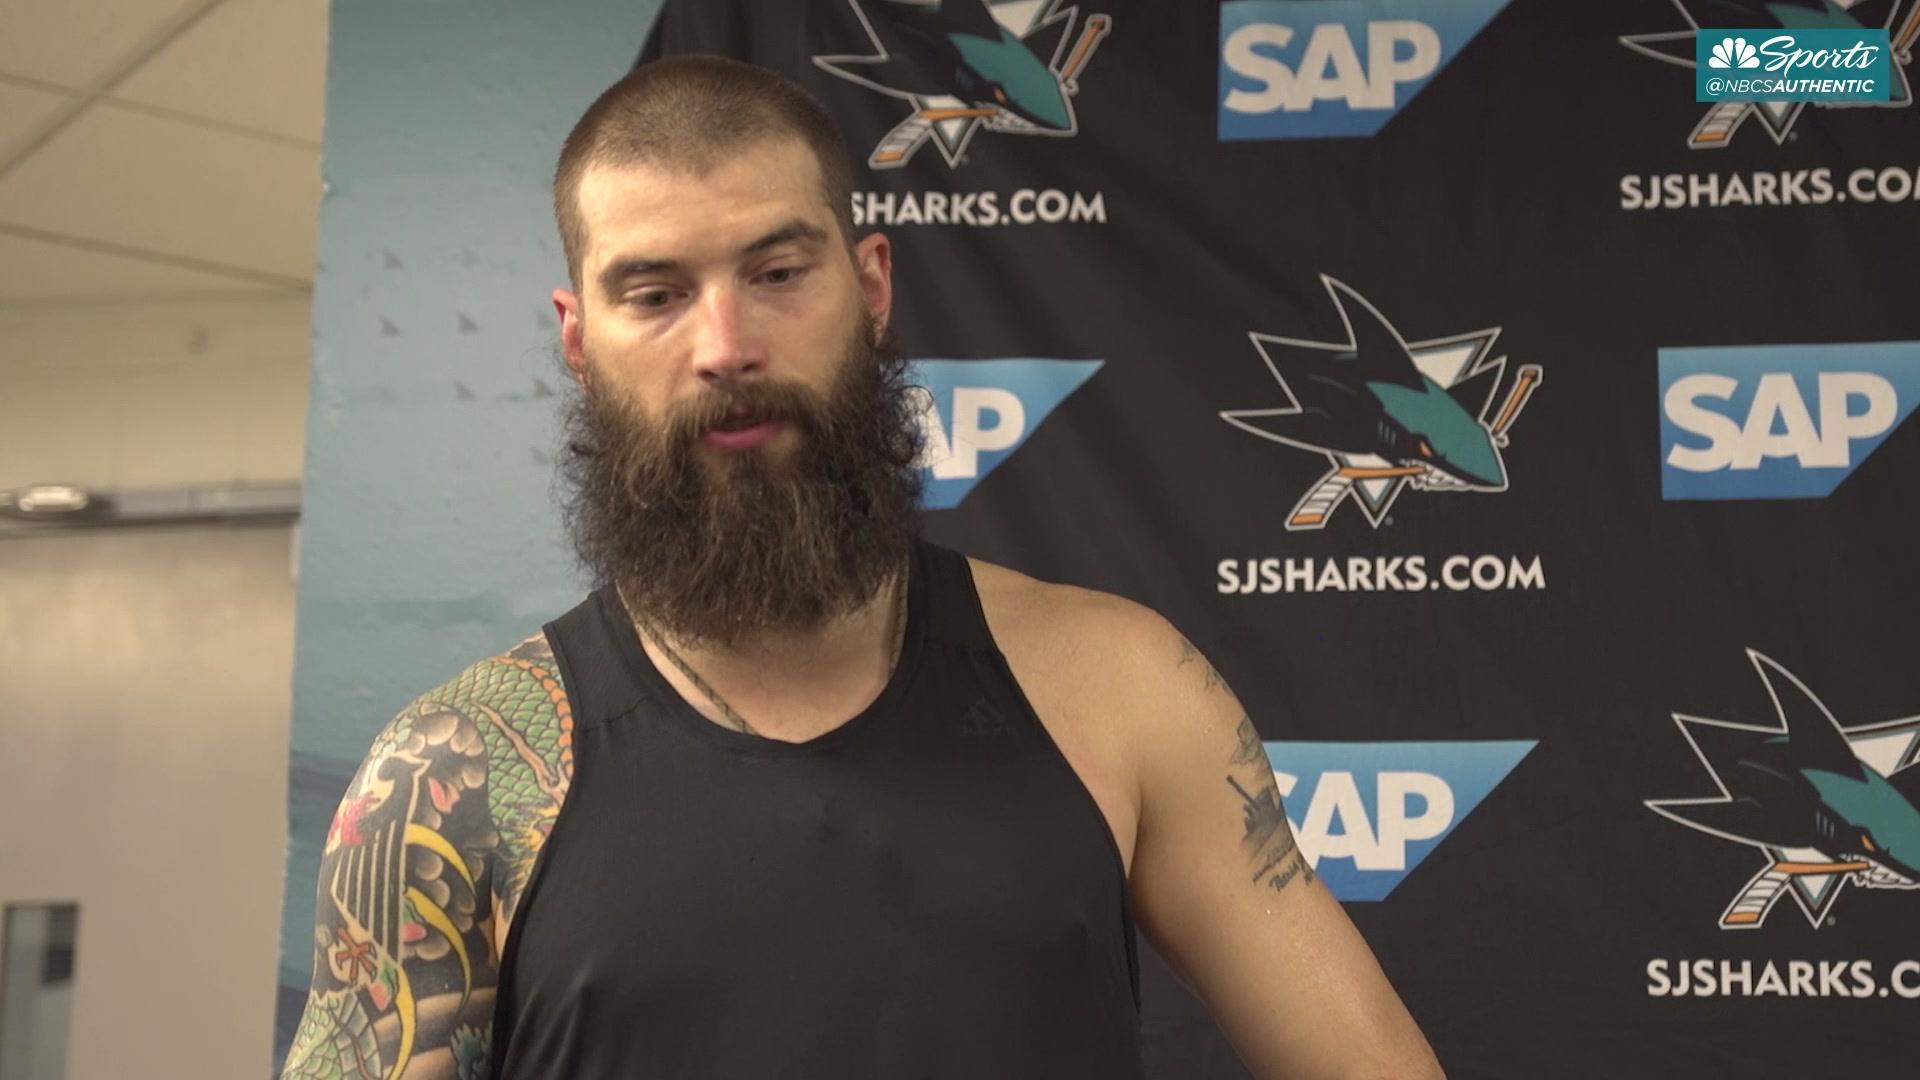 LOOK: Nobody can top this outfit from the Sharks' Brent Burns 